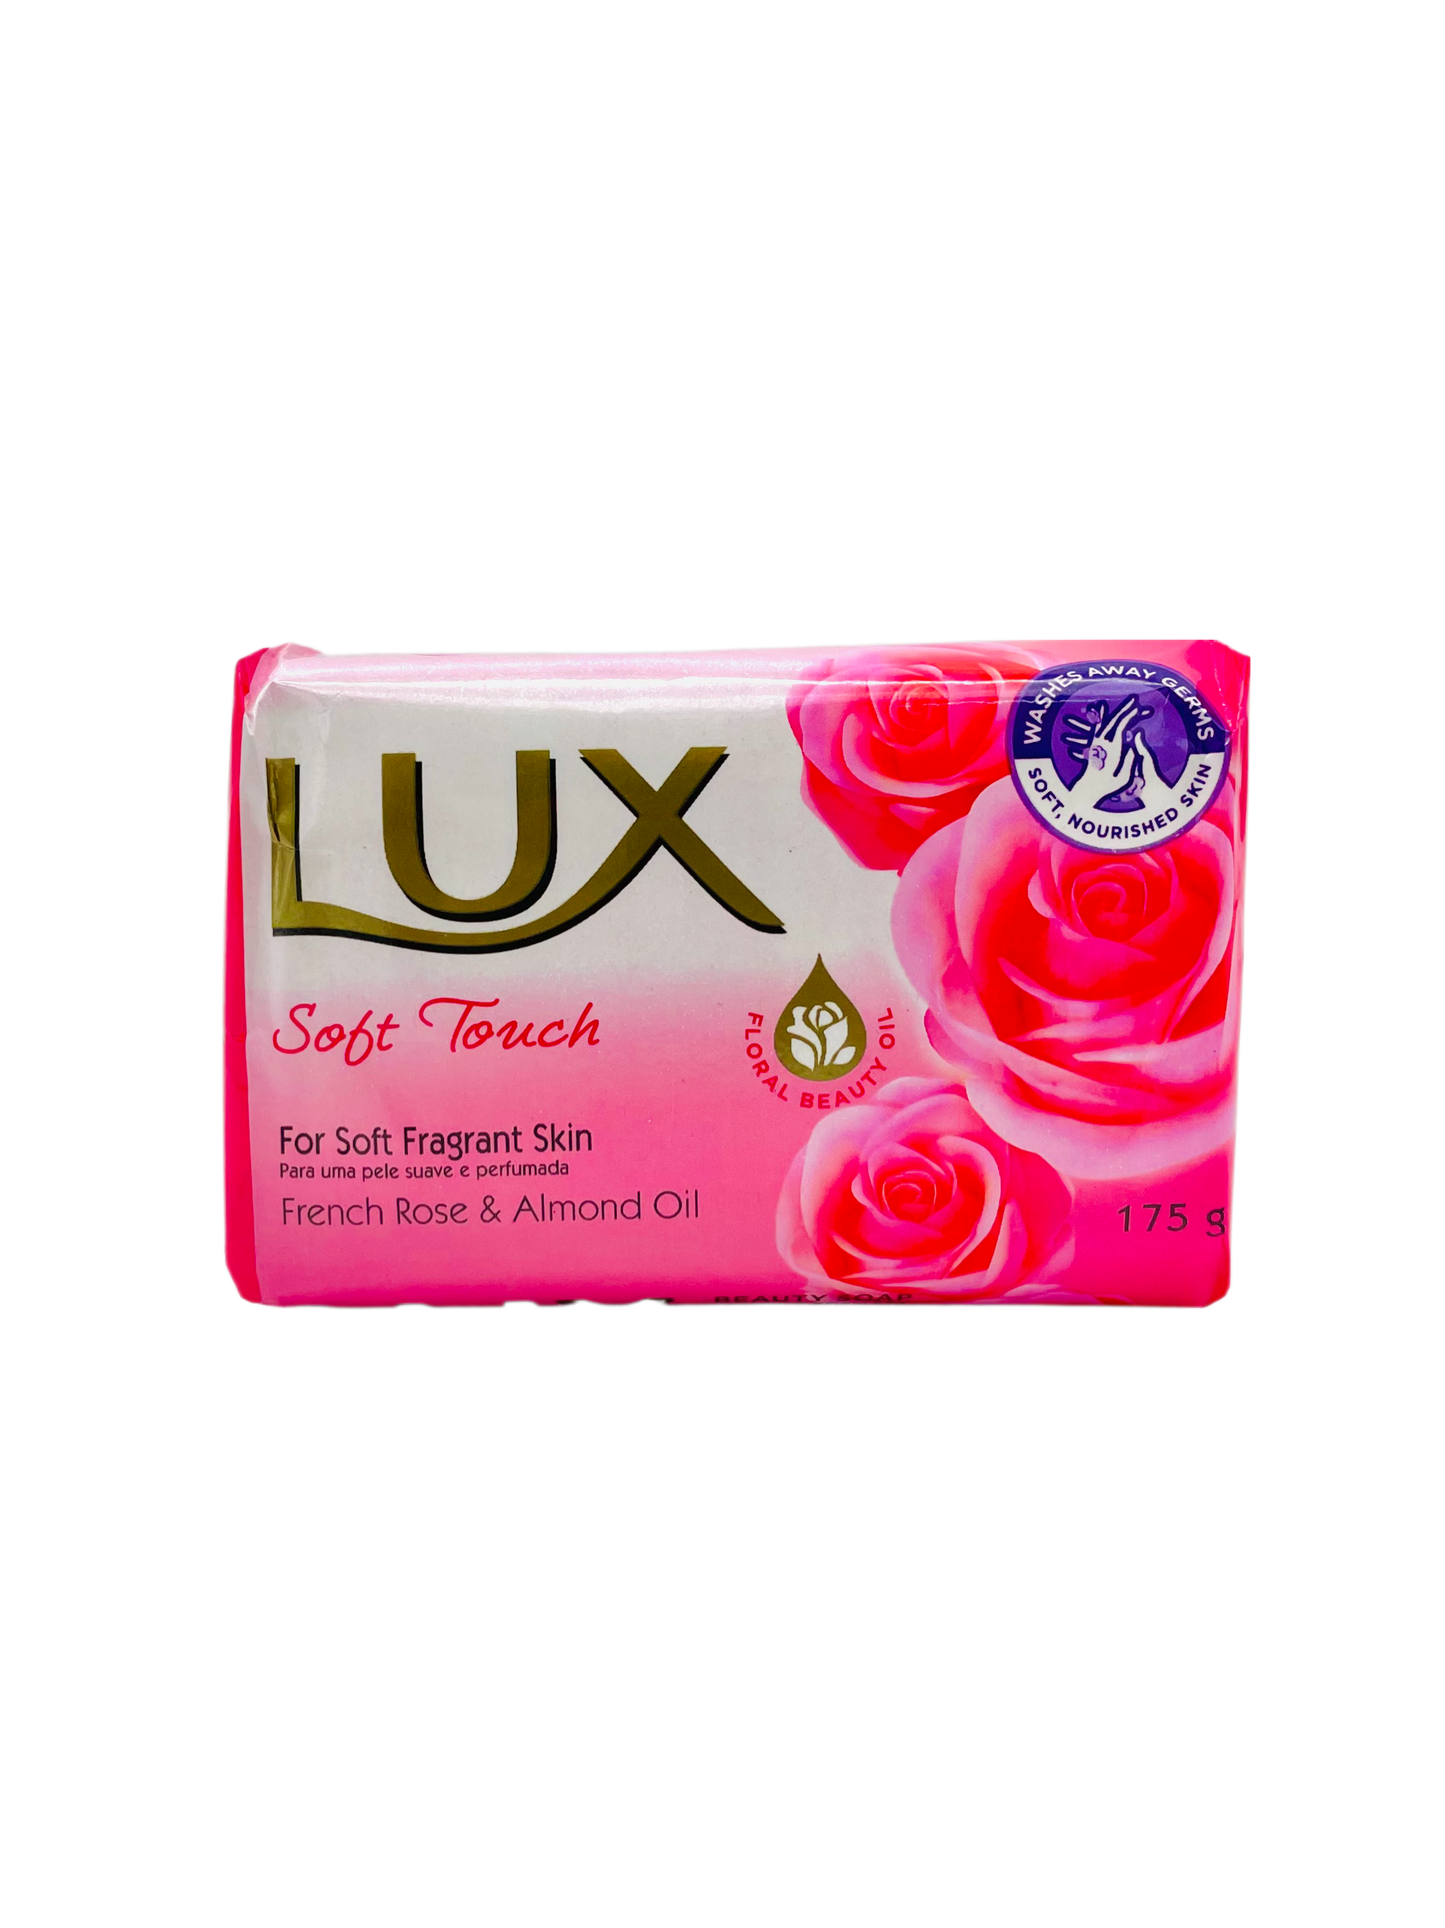 Lux - Soft touch 175g